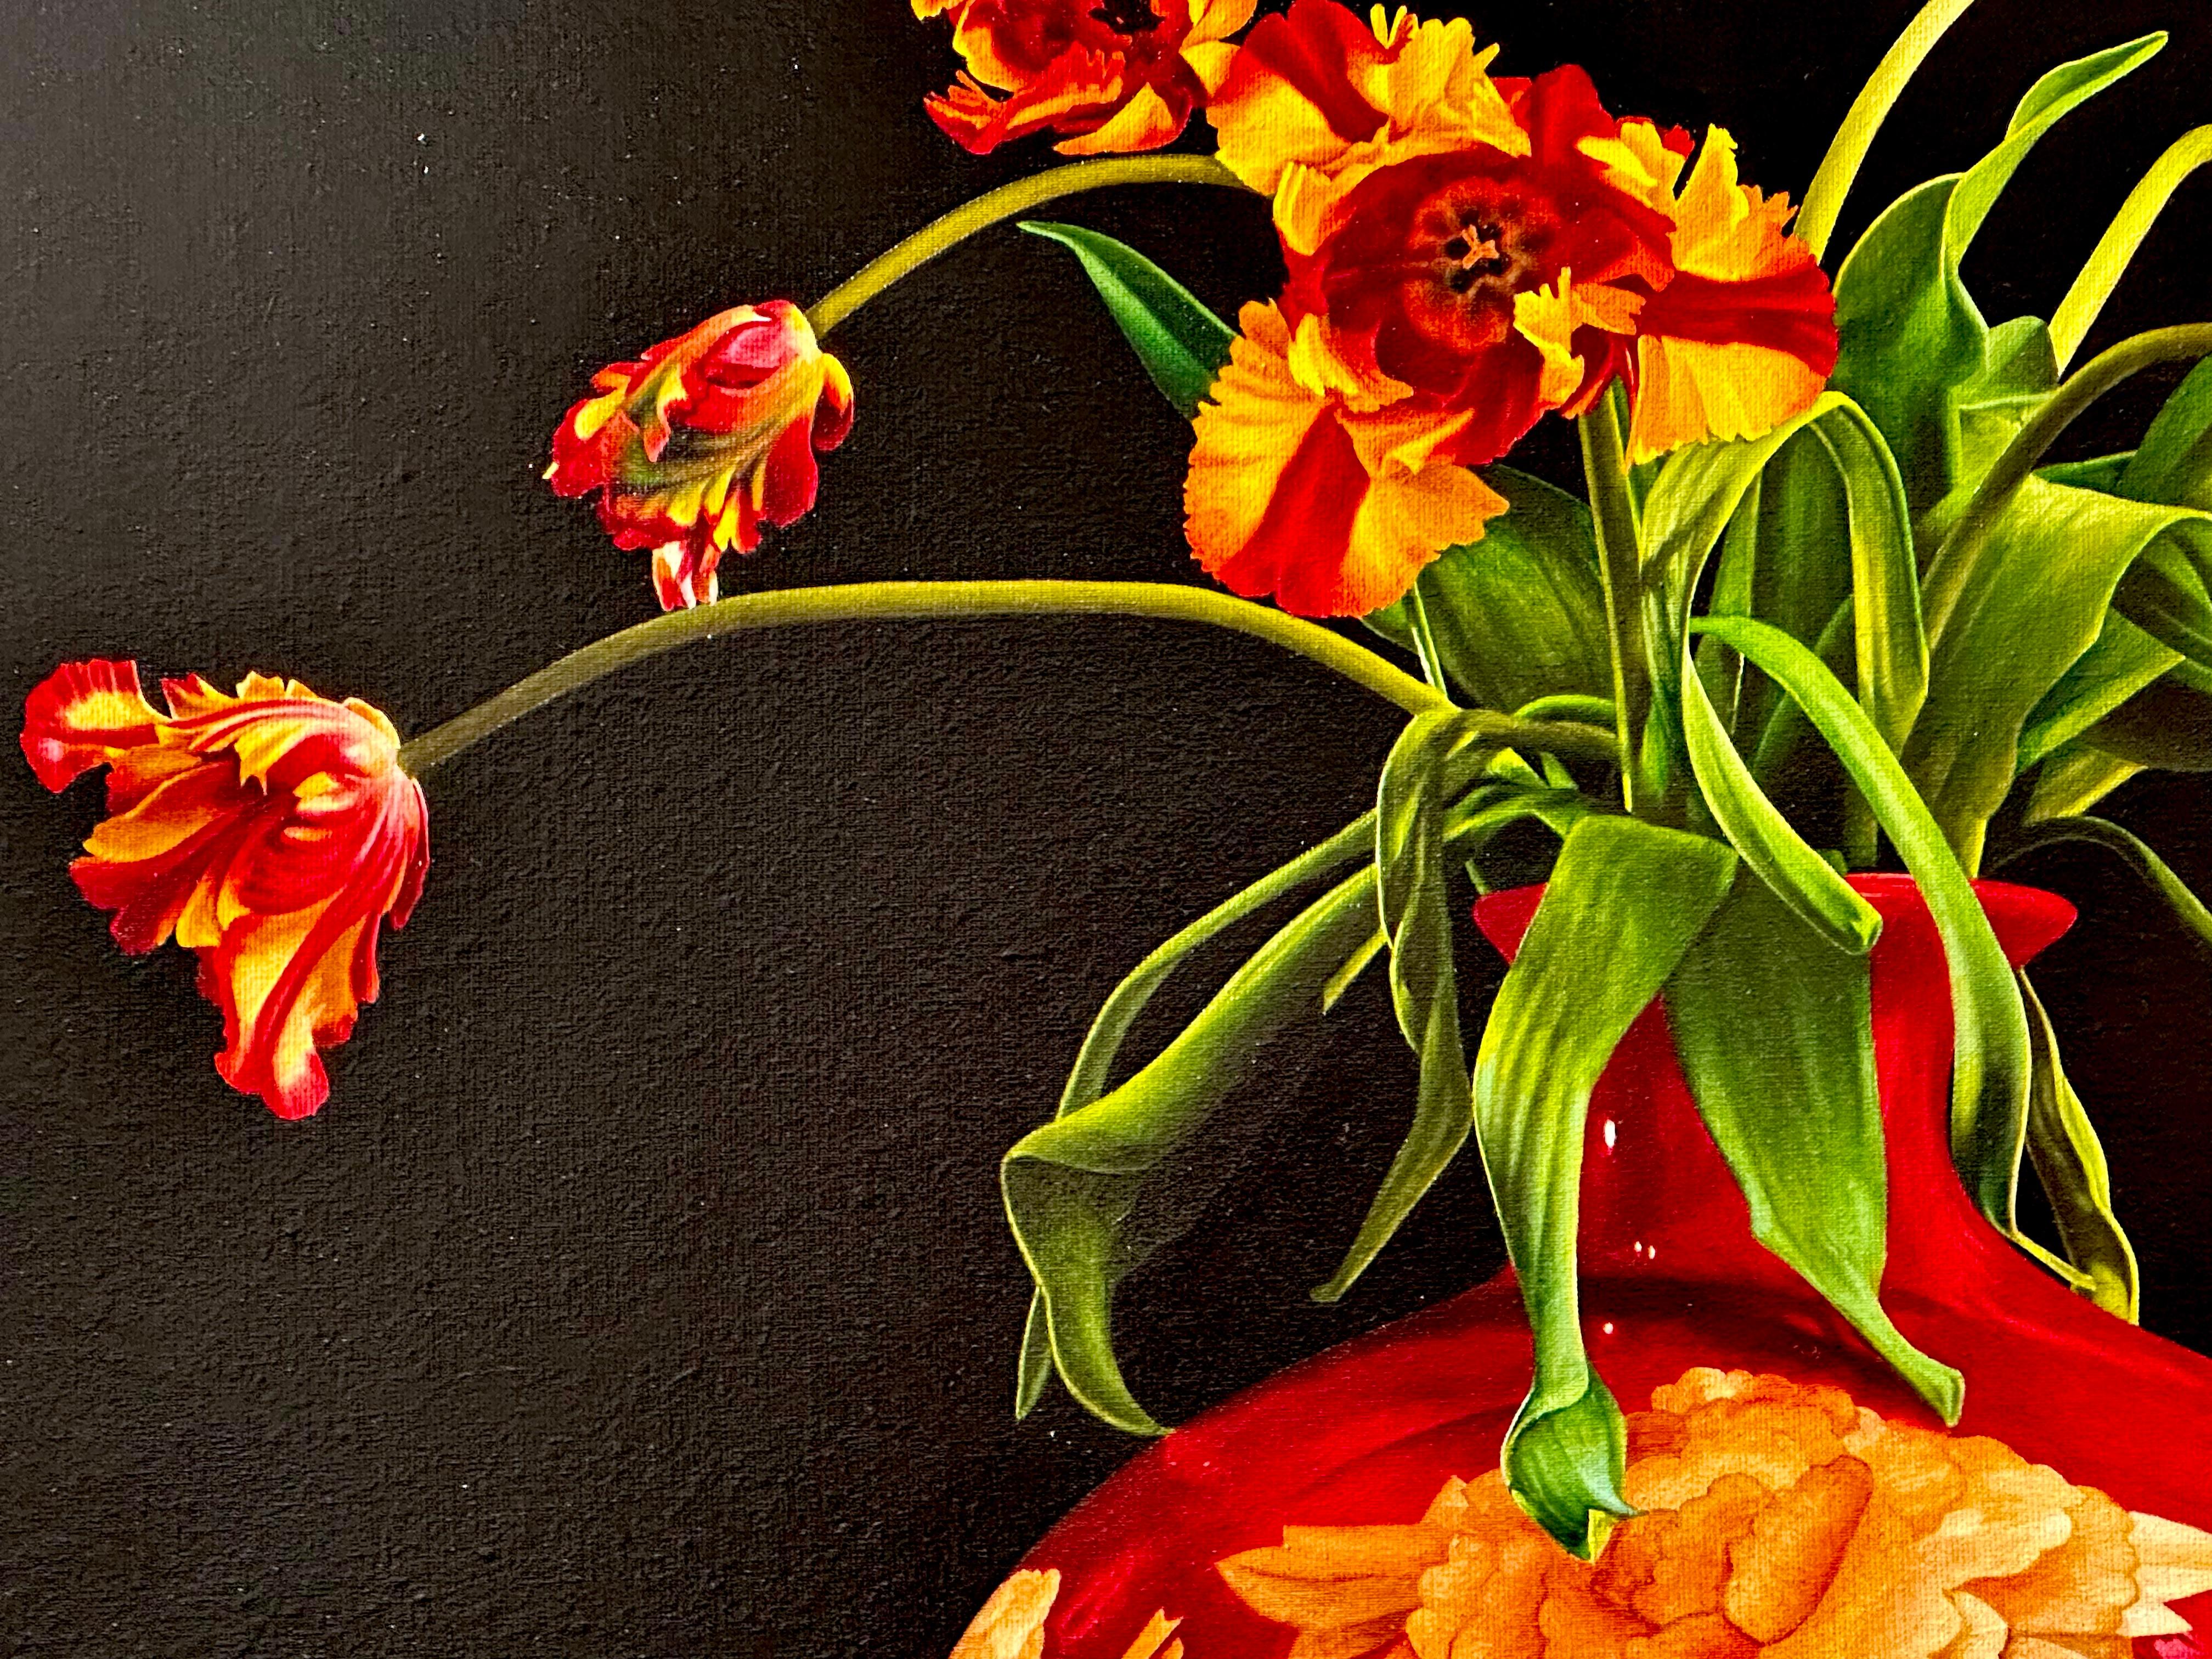 Tulips in red and yellow in Red Vase -21st Century Realistic Flower Painting  For Sale 1